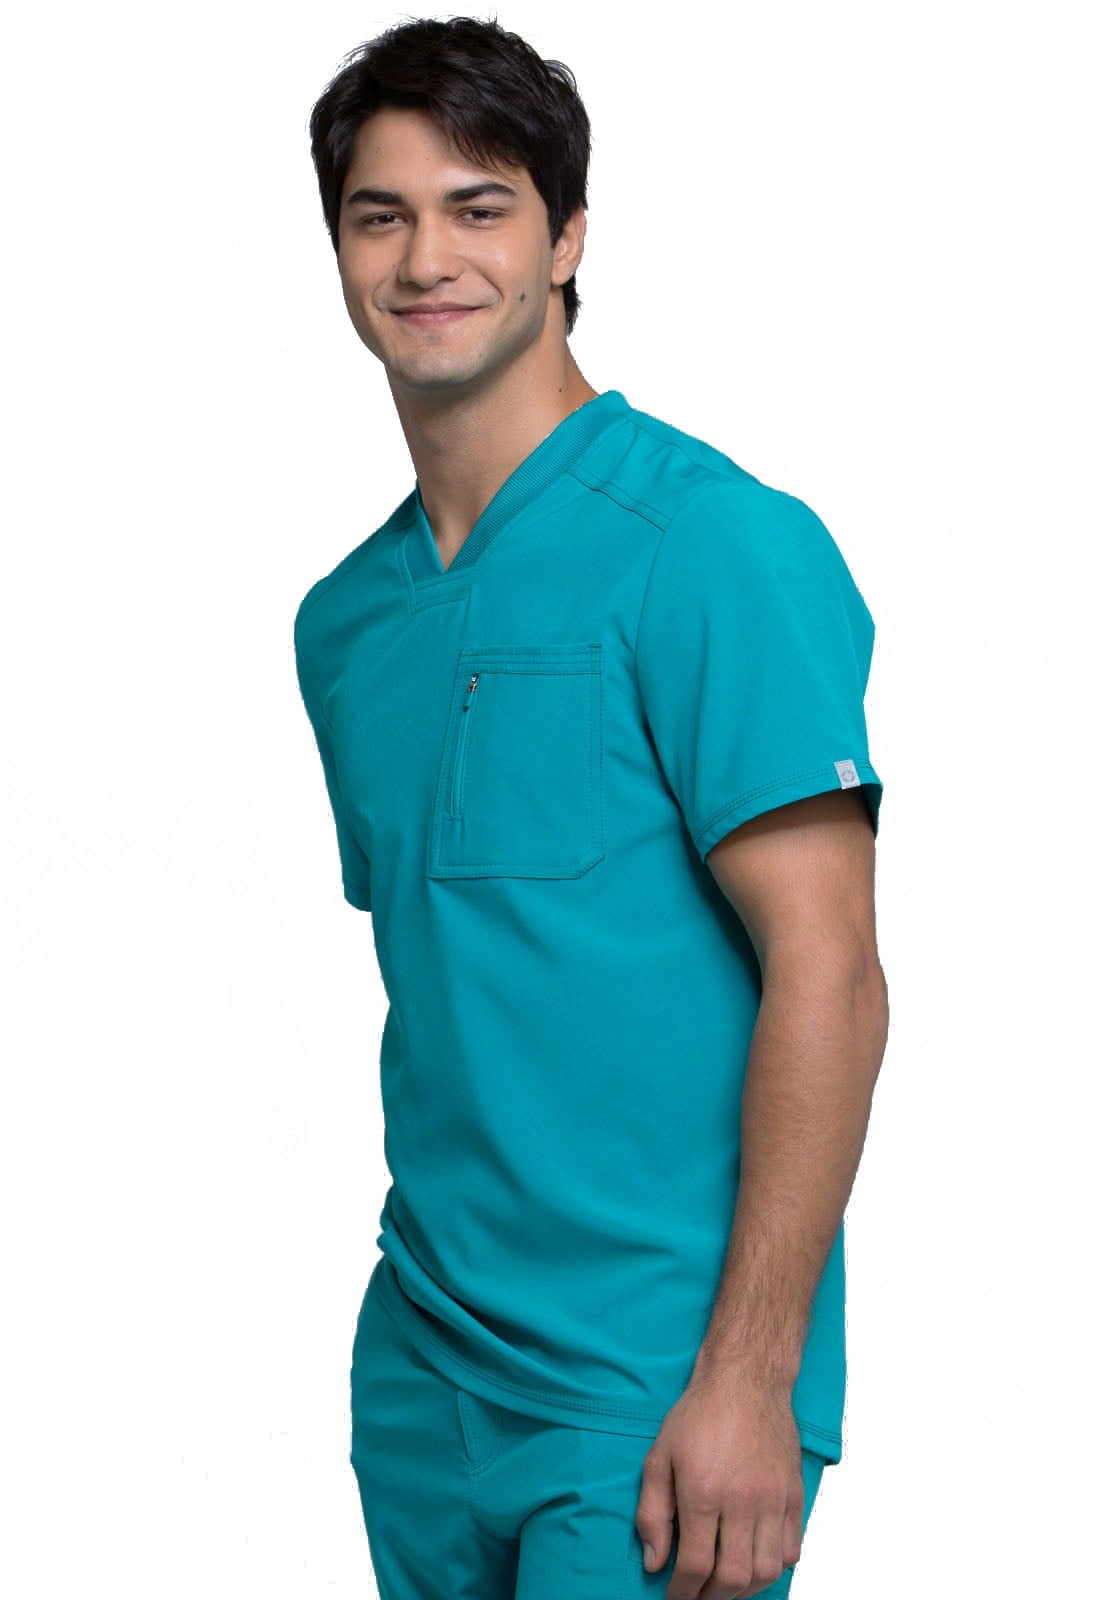 Teal Blue Cherokee Scrubs Infinity Mens V Neck Top CK910A TLPS Antimicrobial 